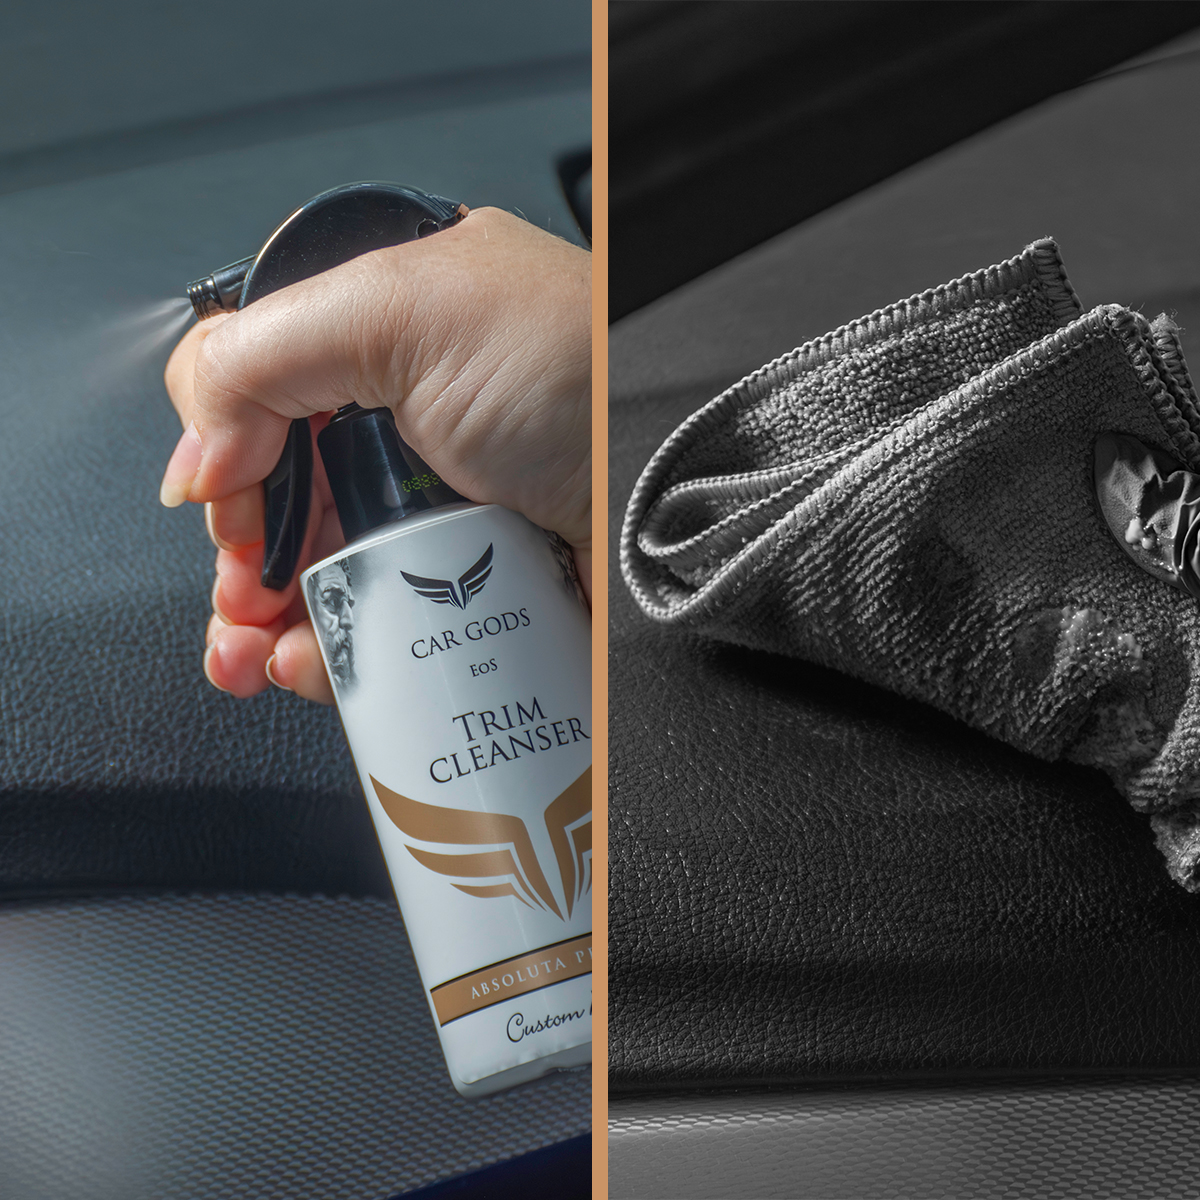 Left image shows Trim Cleanser being sprayed onto a car’s dashboard. Right image shows Trim Reviver being poured onto a grey microfibre cloth.